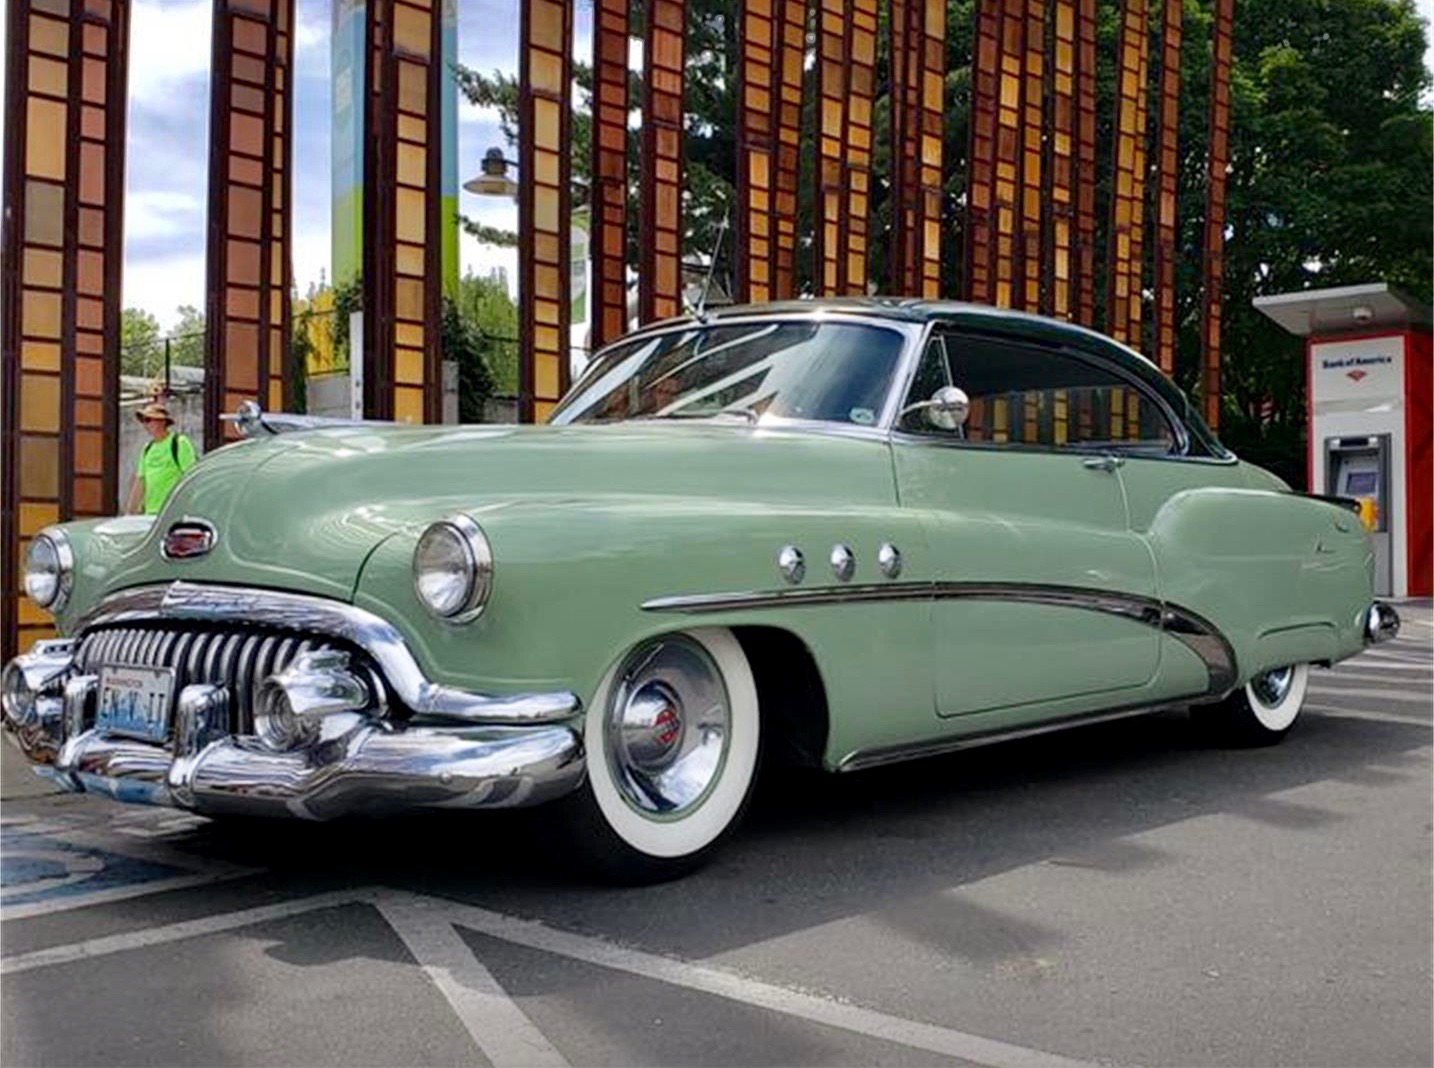 This 1952 Buick Super Riviera 'presents' itself very nicely